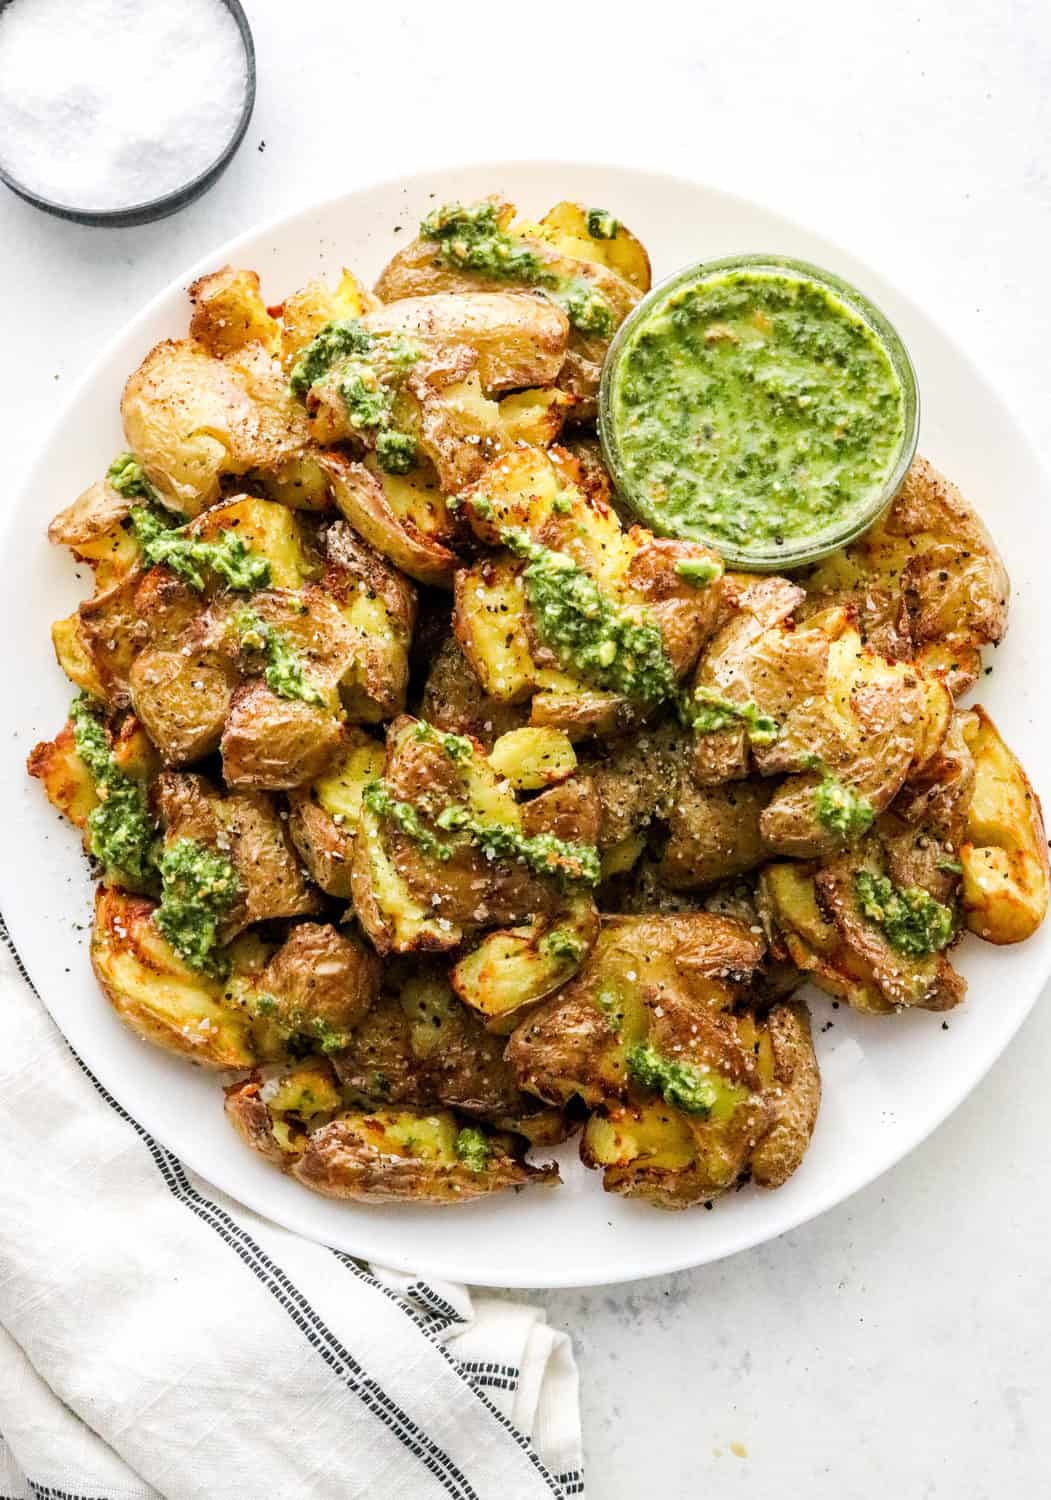 Crispy smashed golden potatoes on a platter with pesto drizzled on them